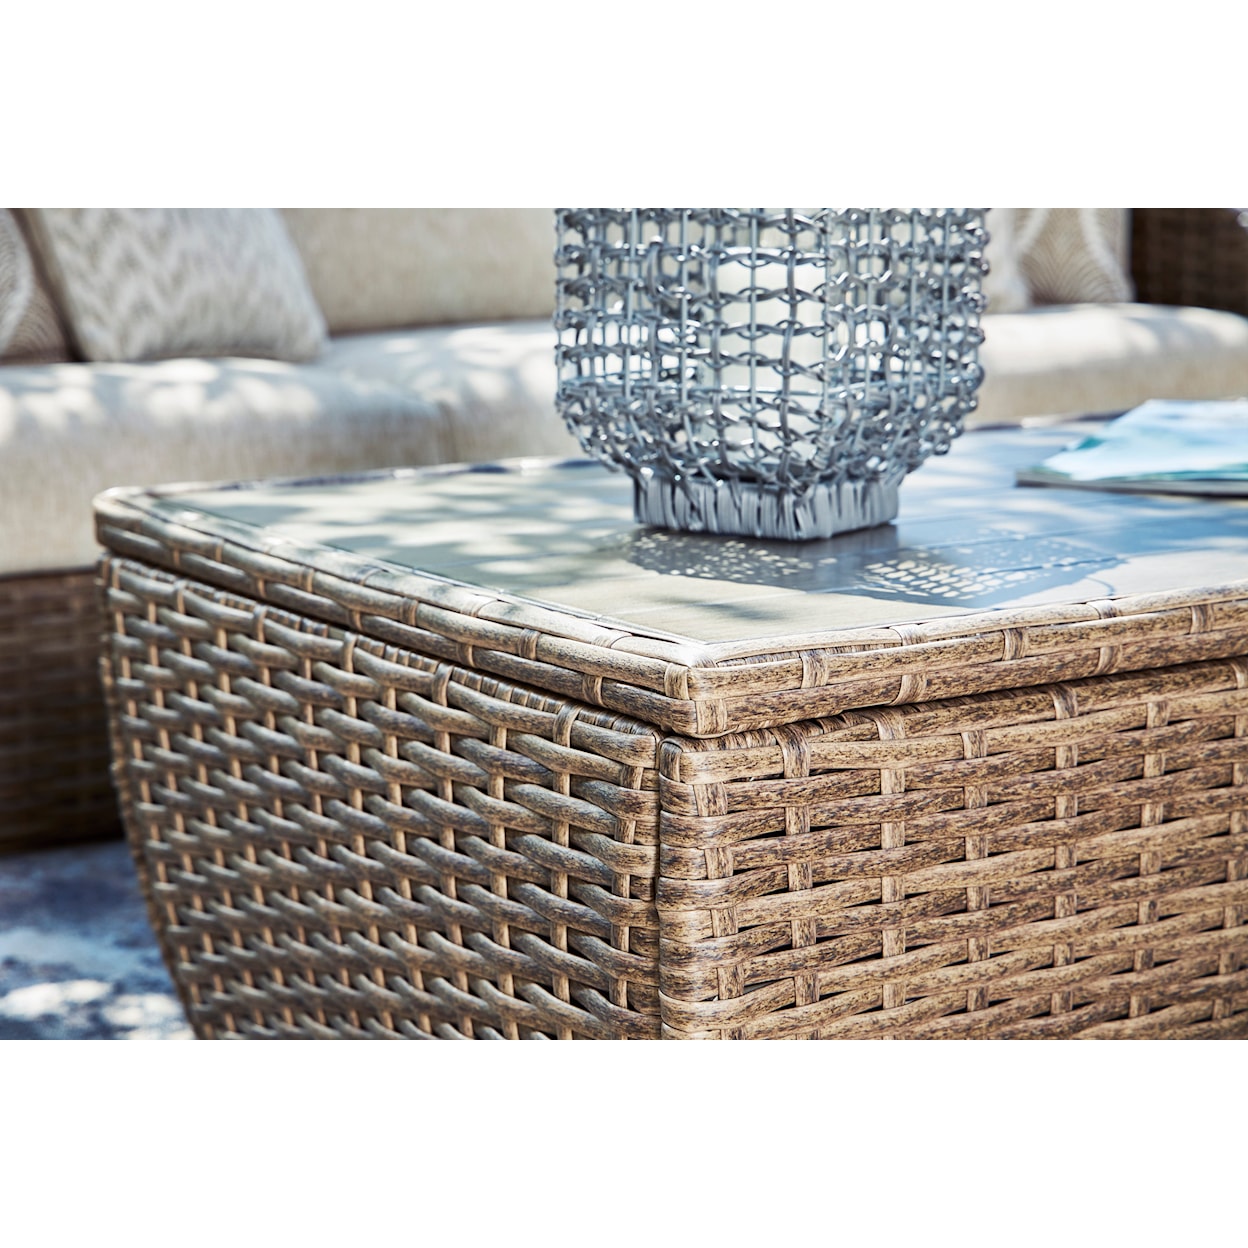 Ashley Signature Design Sandy Bloom Outdoor Coffee Table